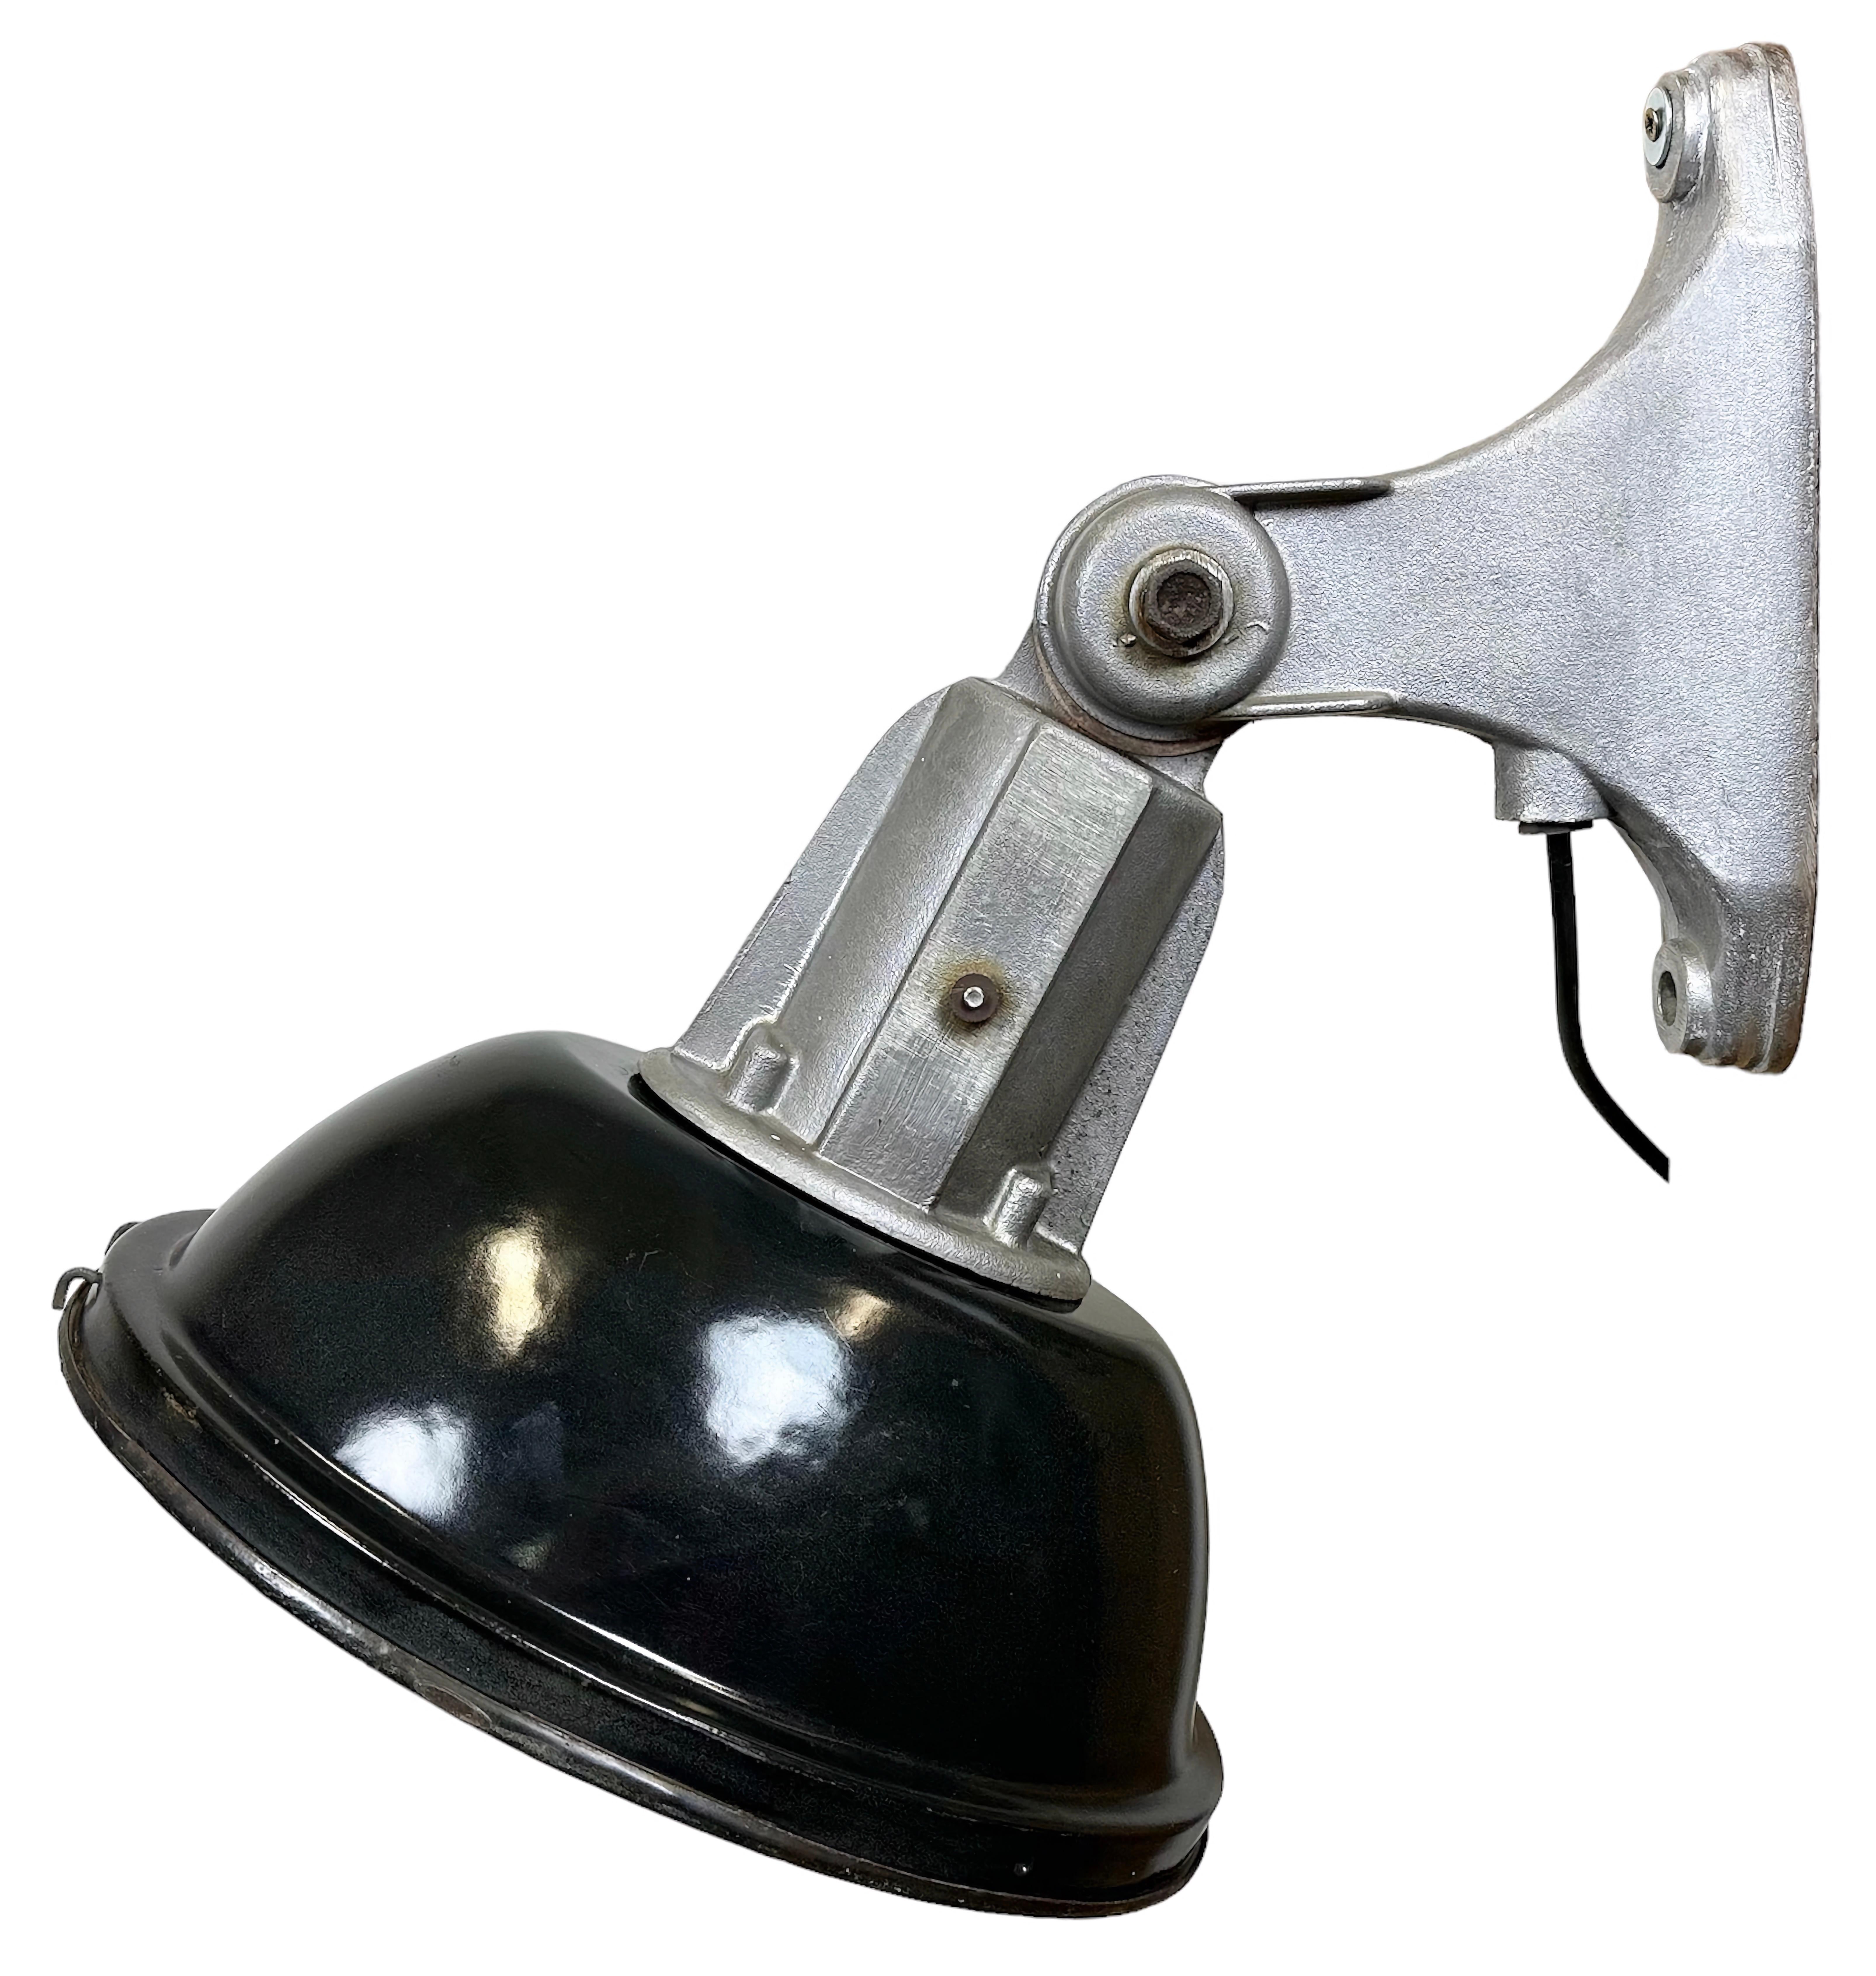 Industrial wall light with adjustable angle made in France during the 1960s. It features a black enamel shade with white enamel interior, a cast aluminium wall mounting and an iron grid. The porcelain socket requires E27/E26 light bulbs. New